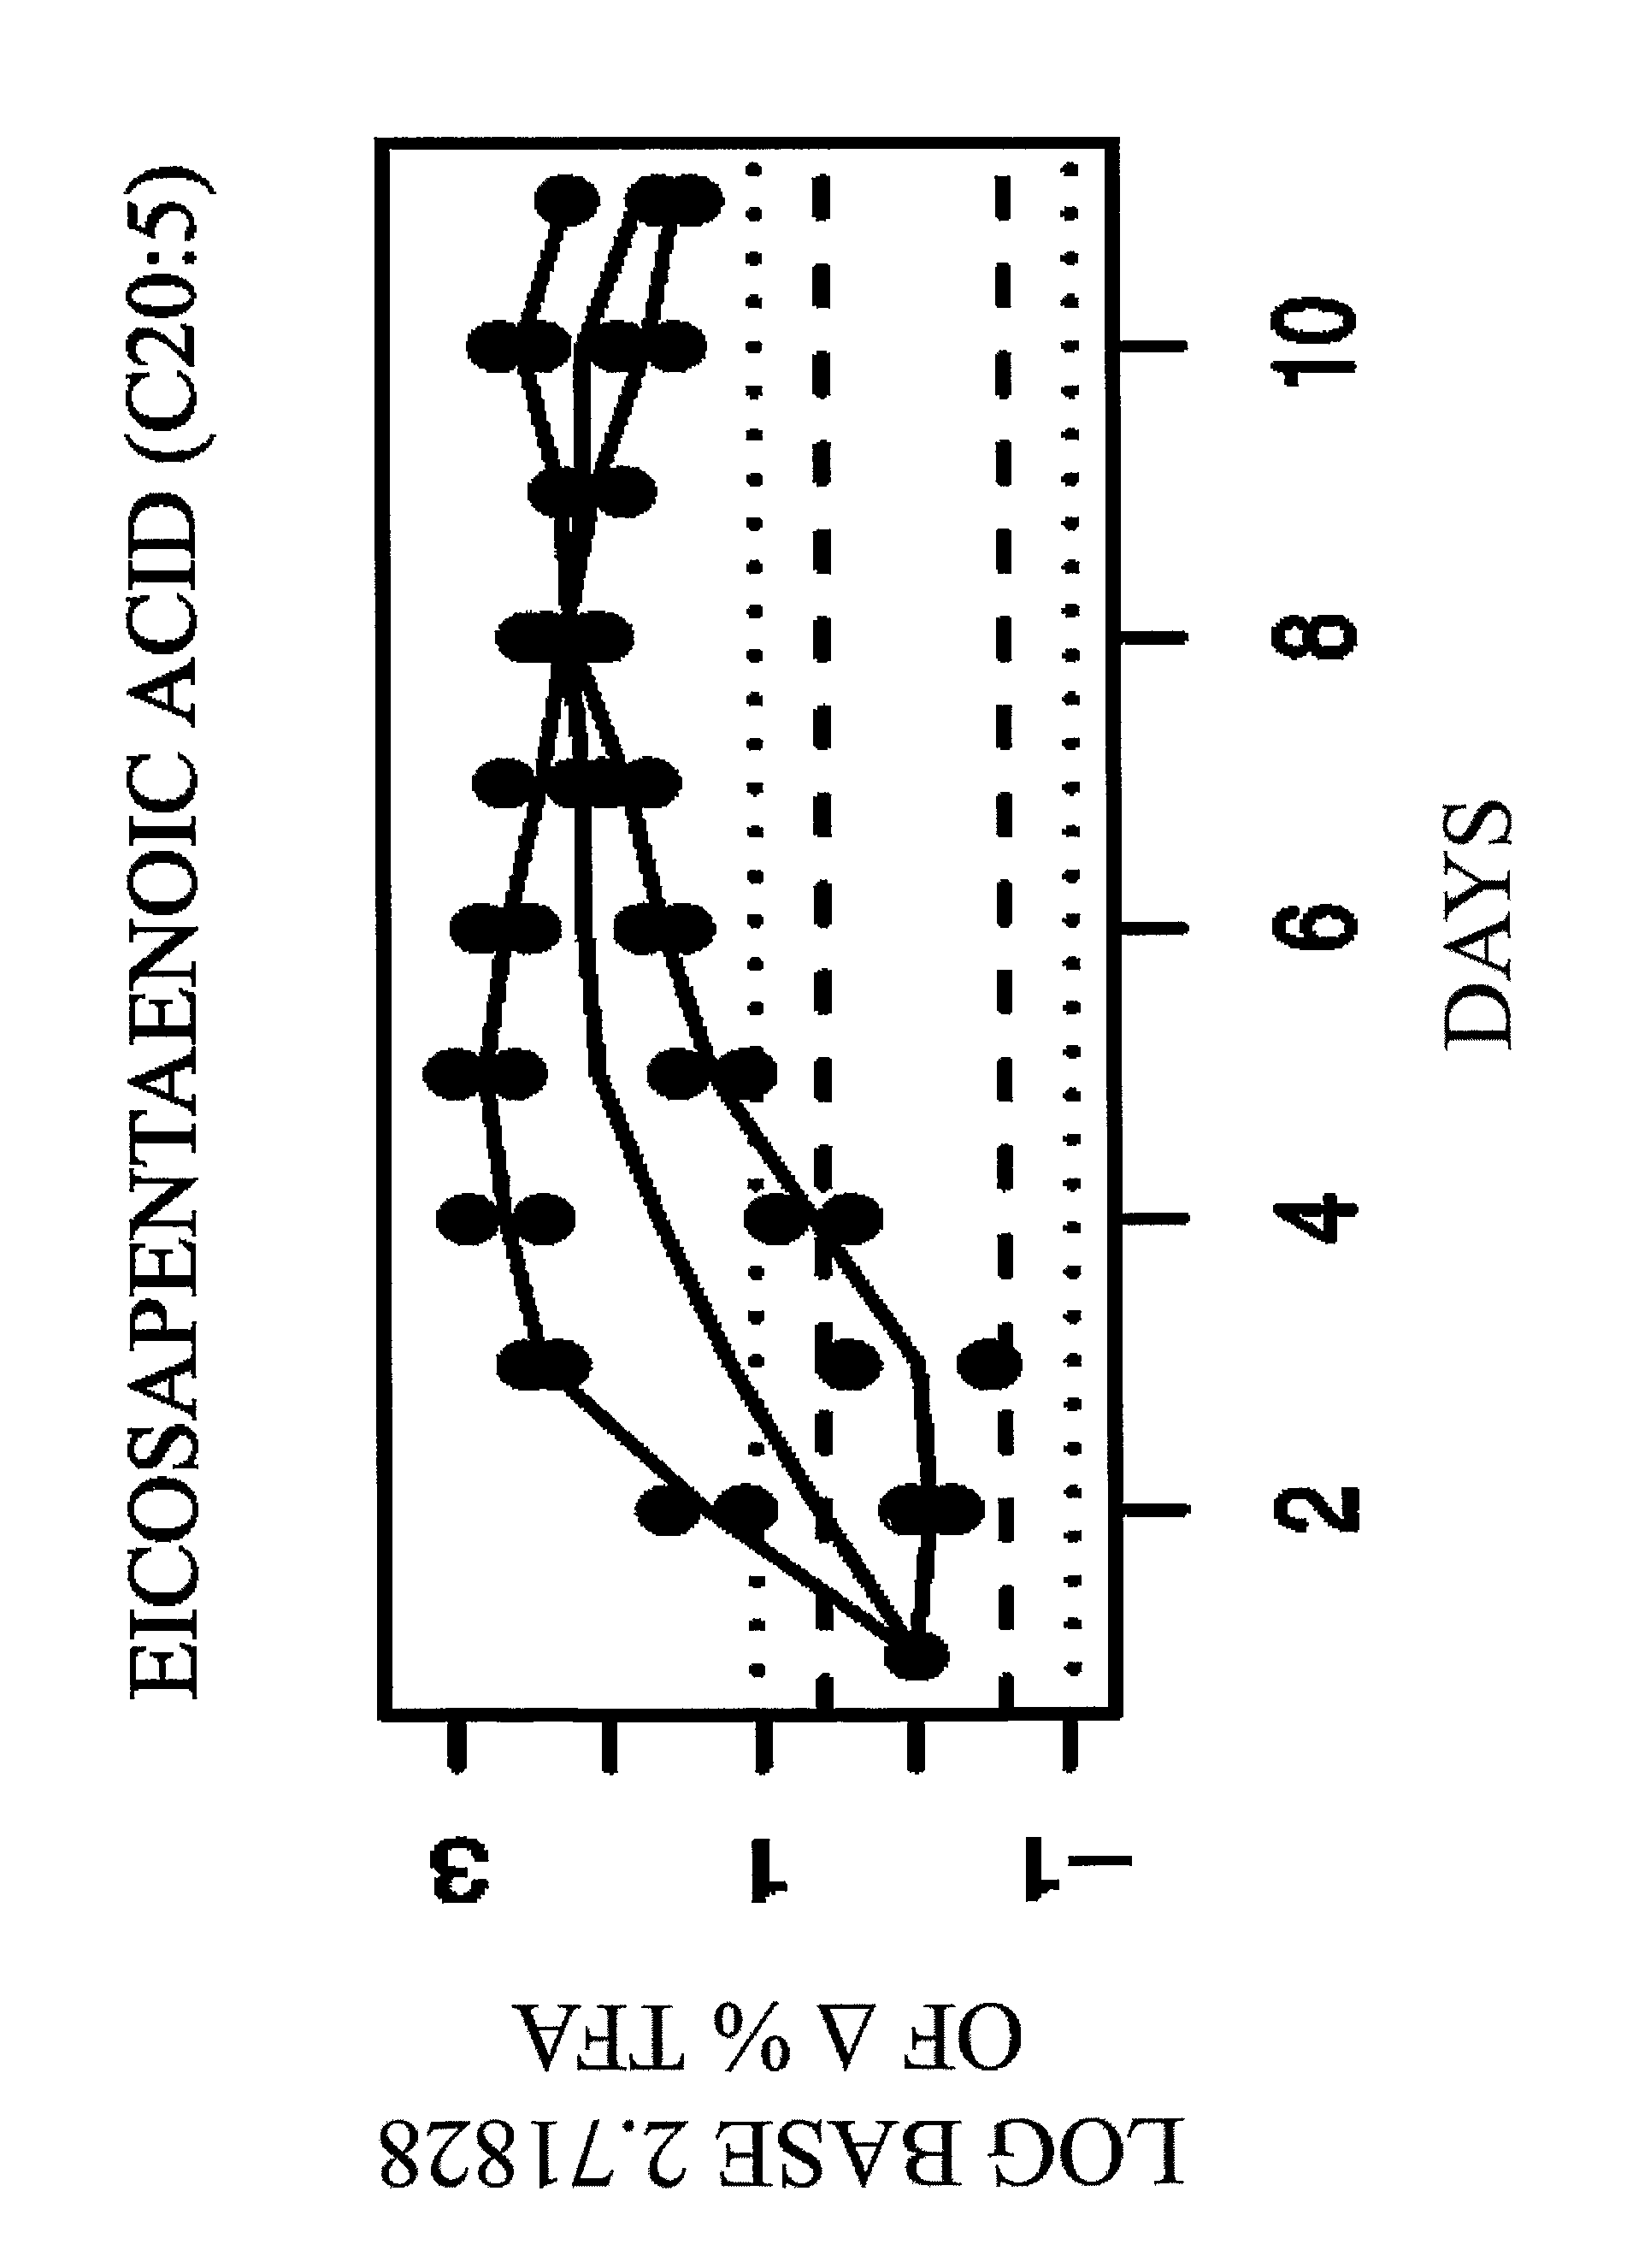 Compositions containing high omega-3 and low saturated fatty acid levels